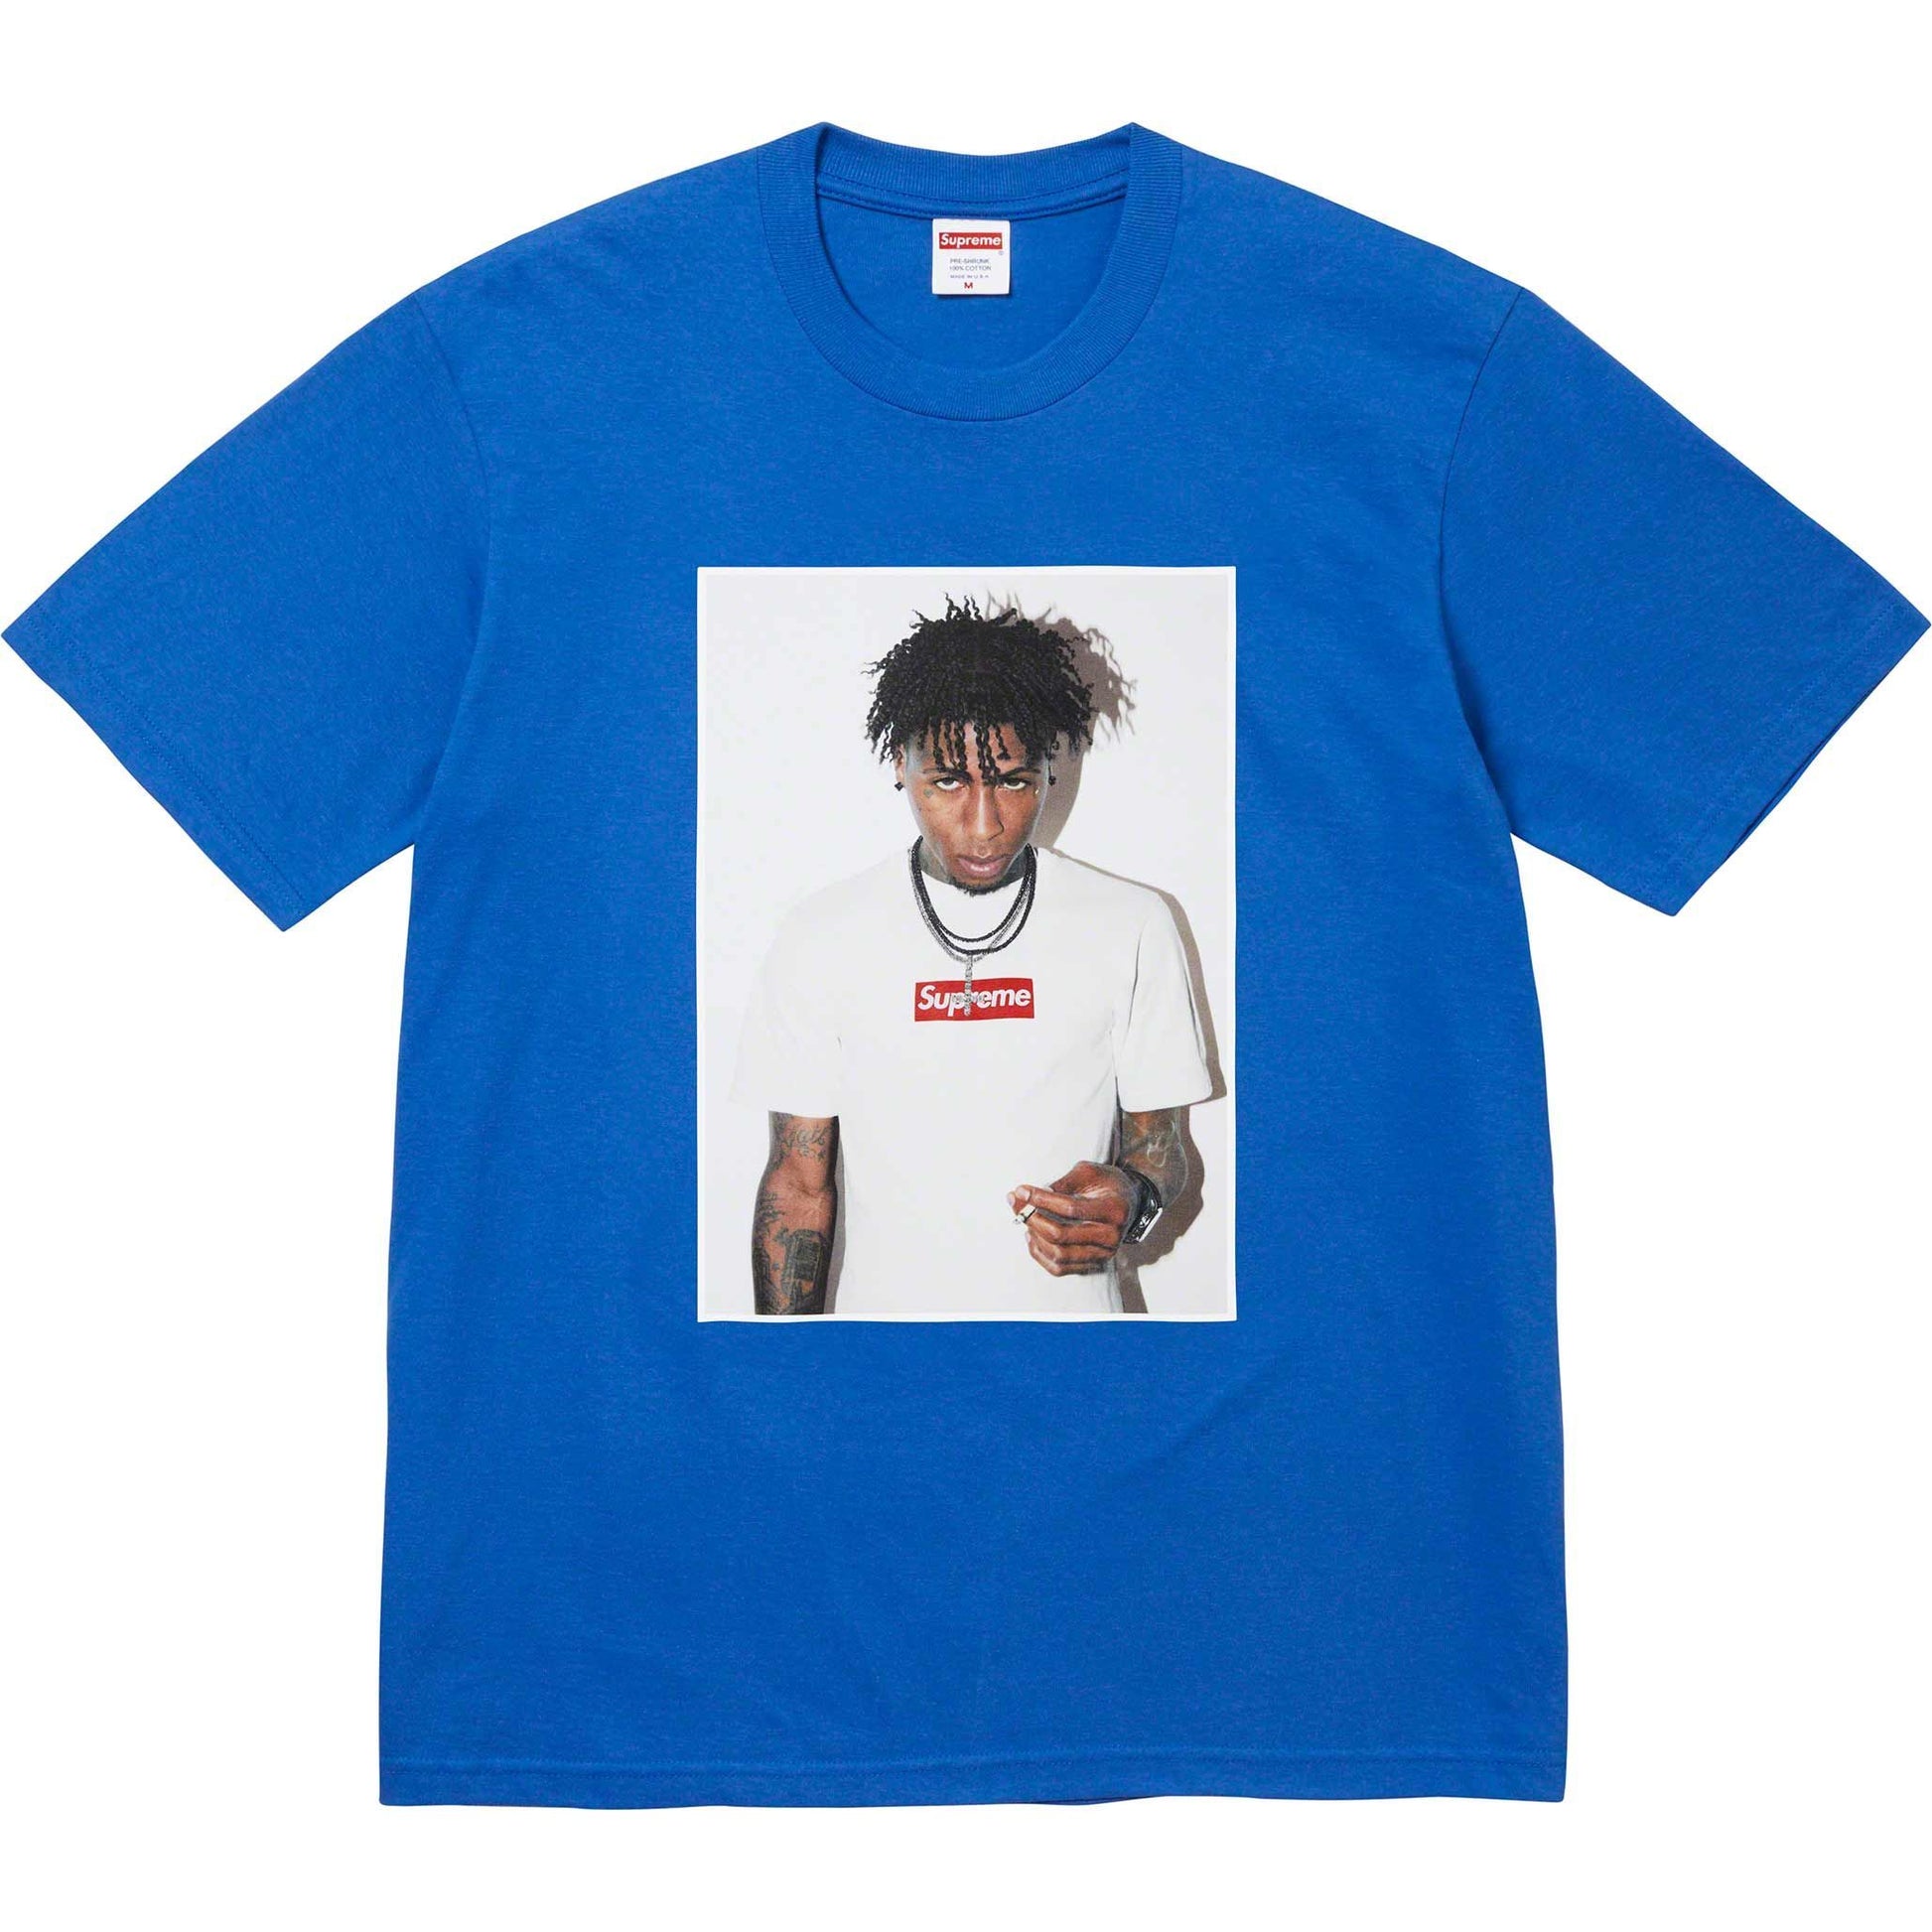 Supreme NBA Youngboy Tee Blue by Supreme from £95.00